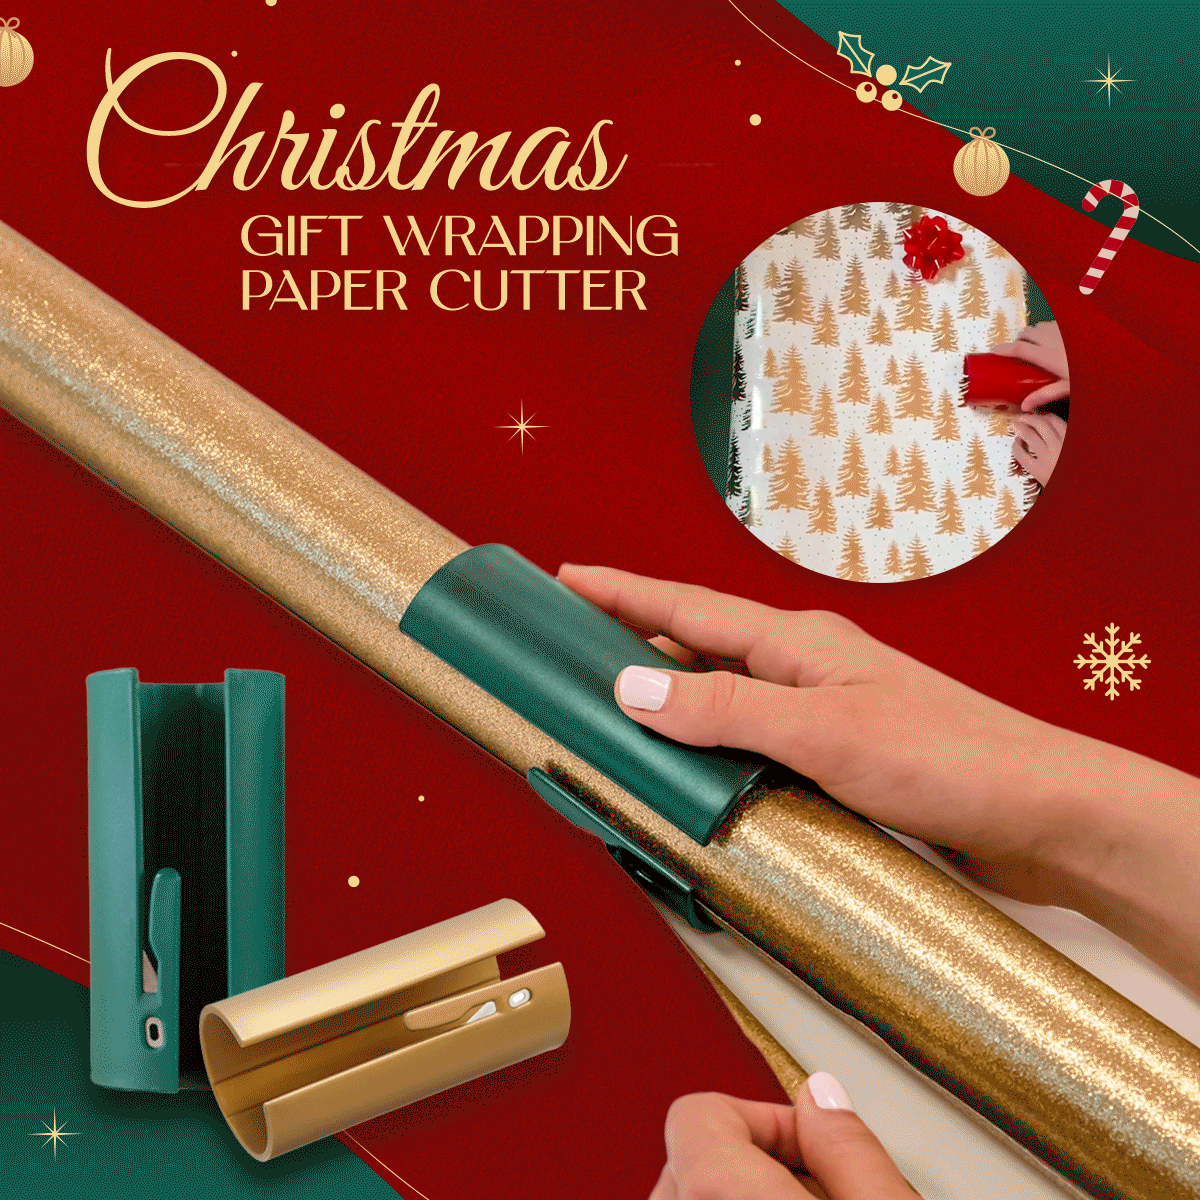 Magic Gift Wrapping Paper Cutter – Christmifis